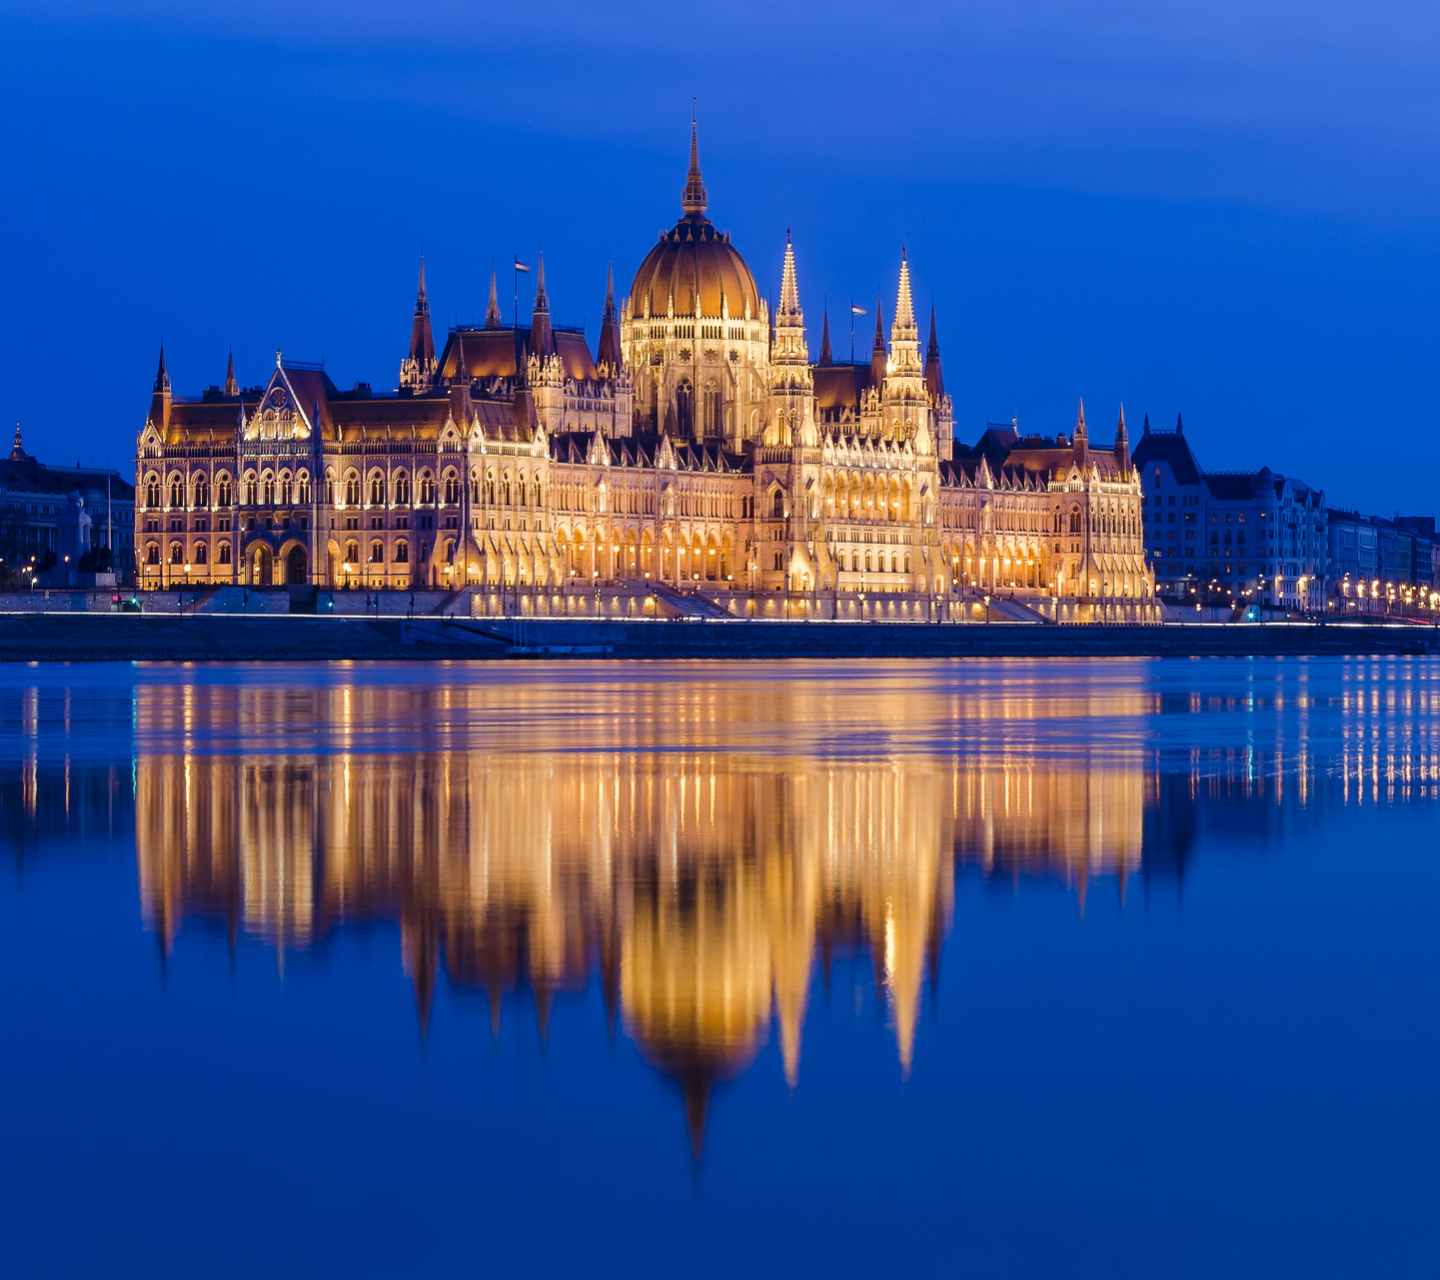 man made, hungarian parliament building, river, architecture, reflection, danube, hungary, monument, budapest, night, monuments